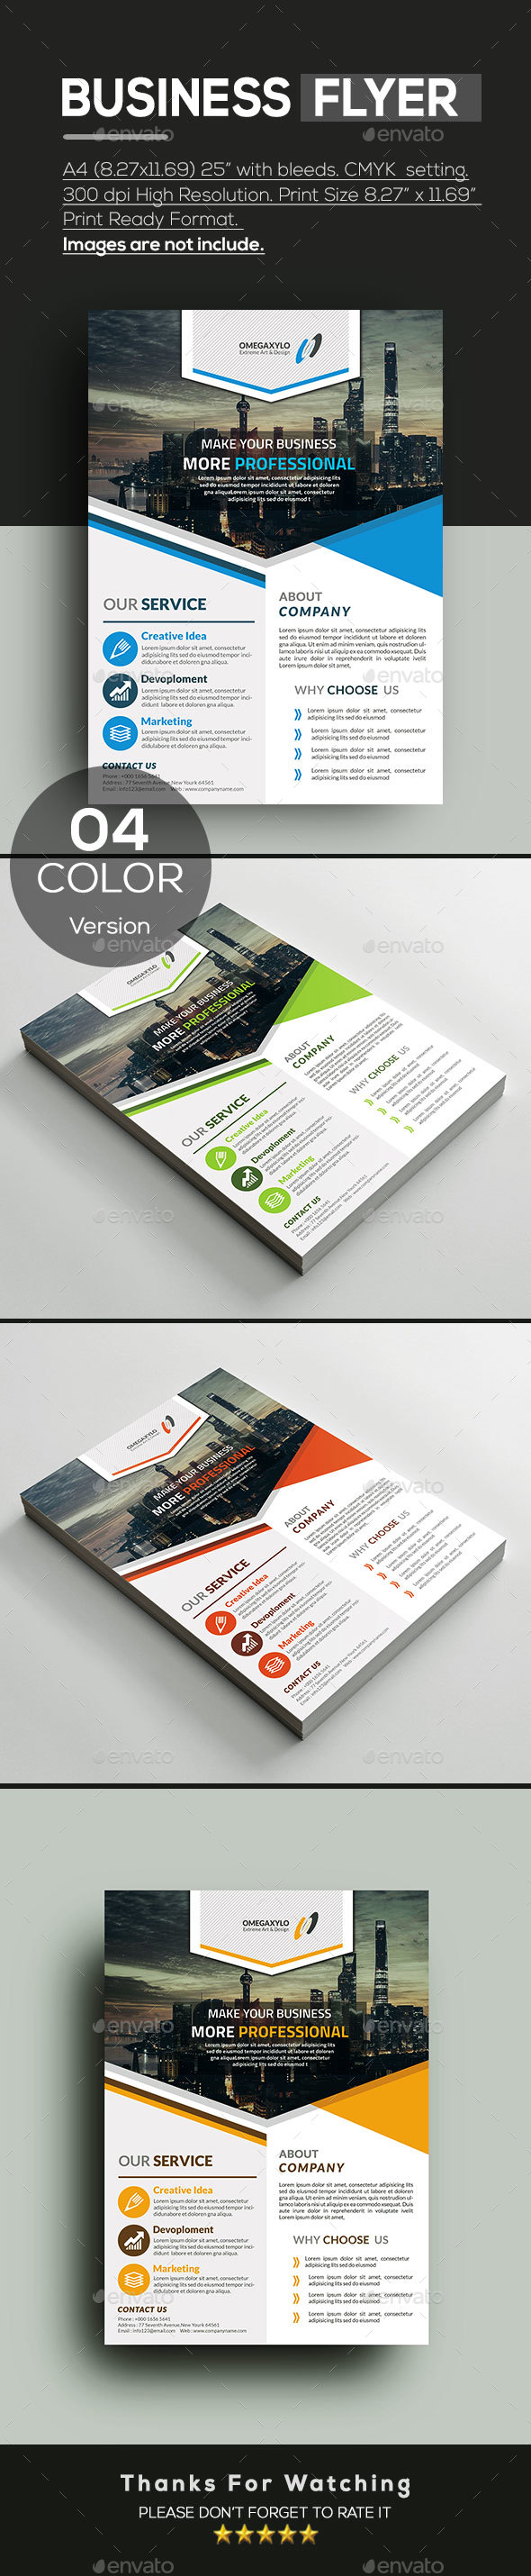 GraphicRiver Business Flyer 20882781